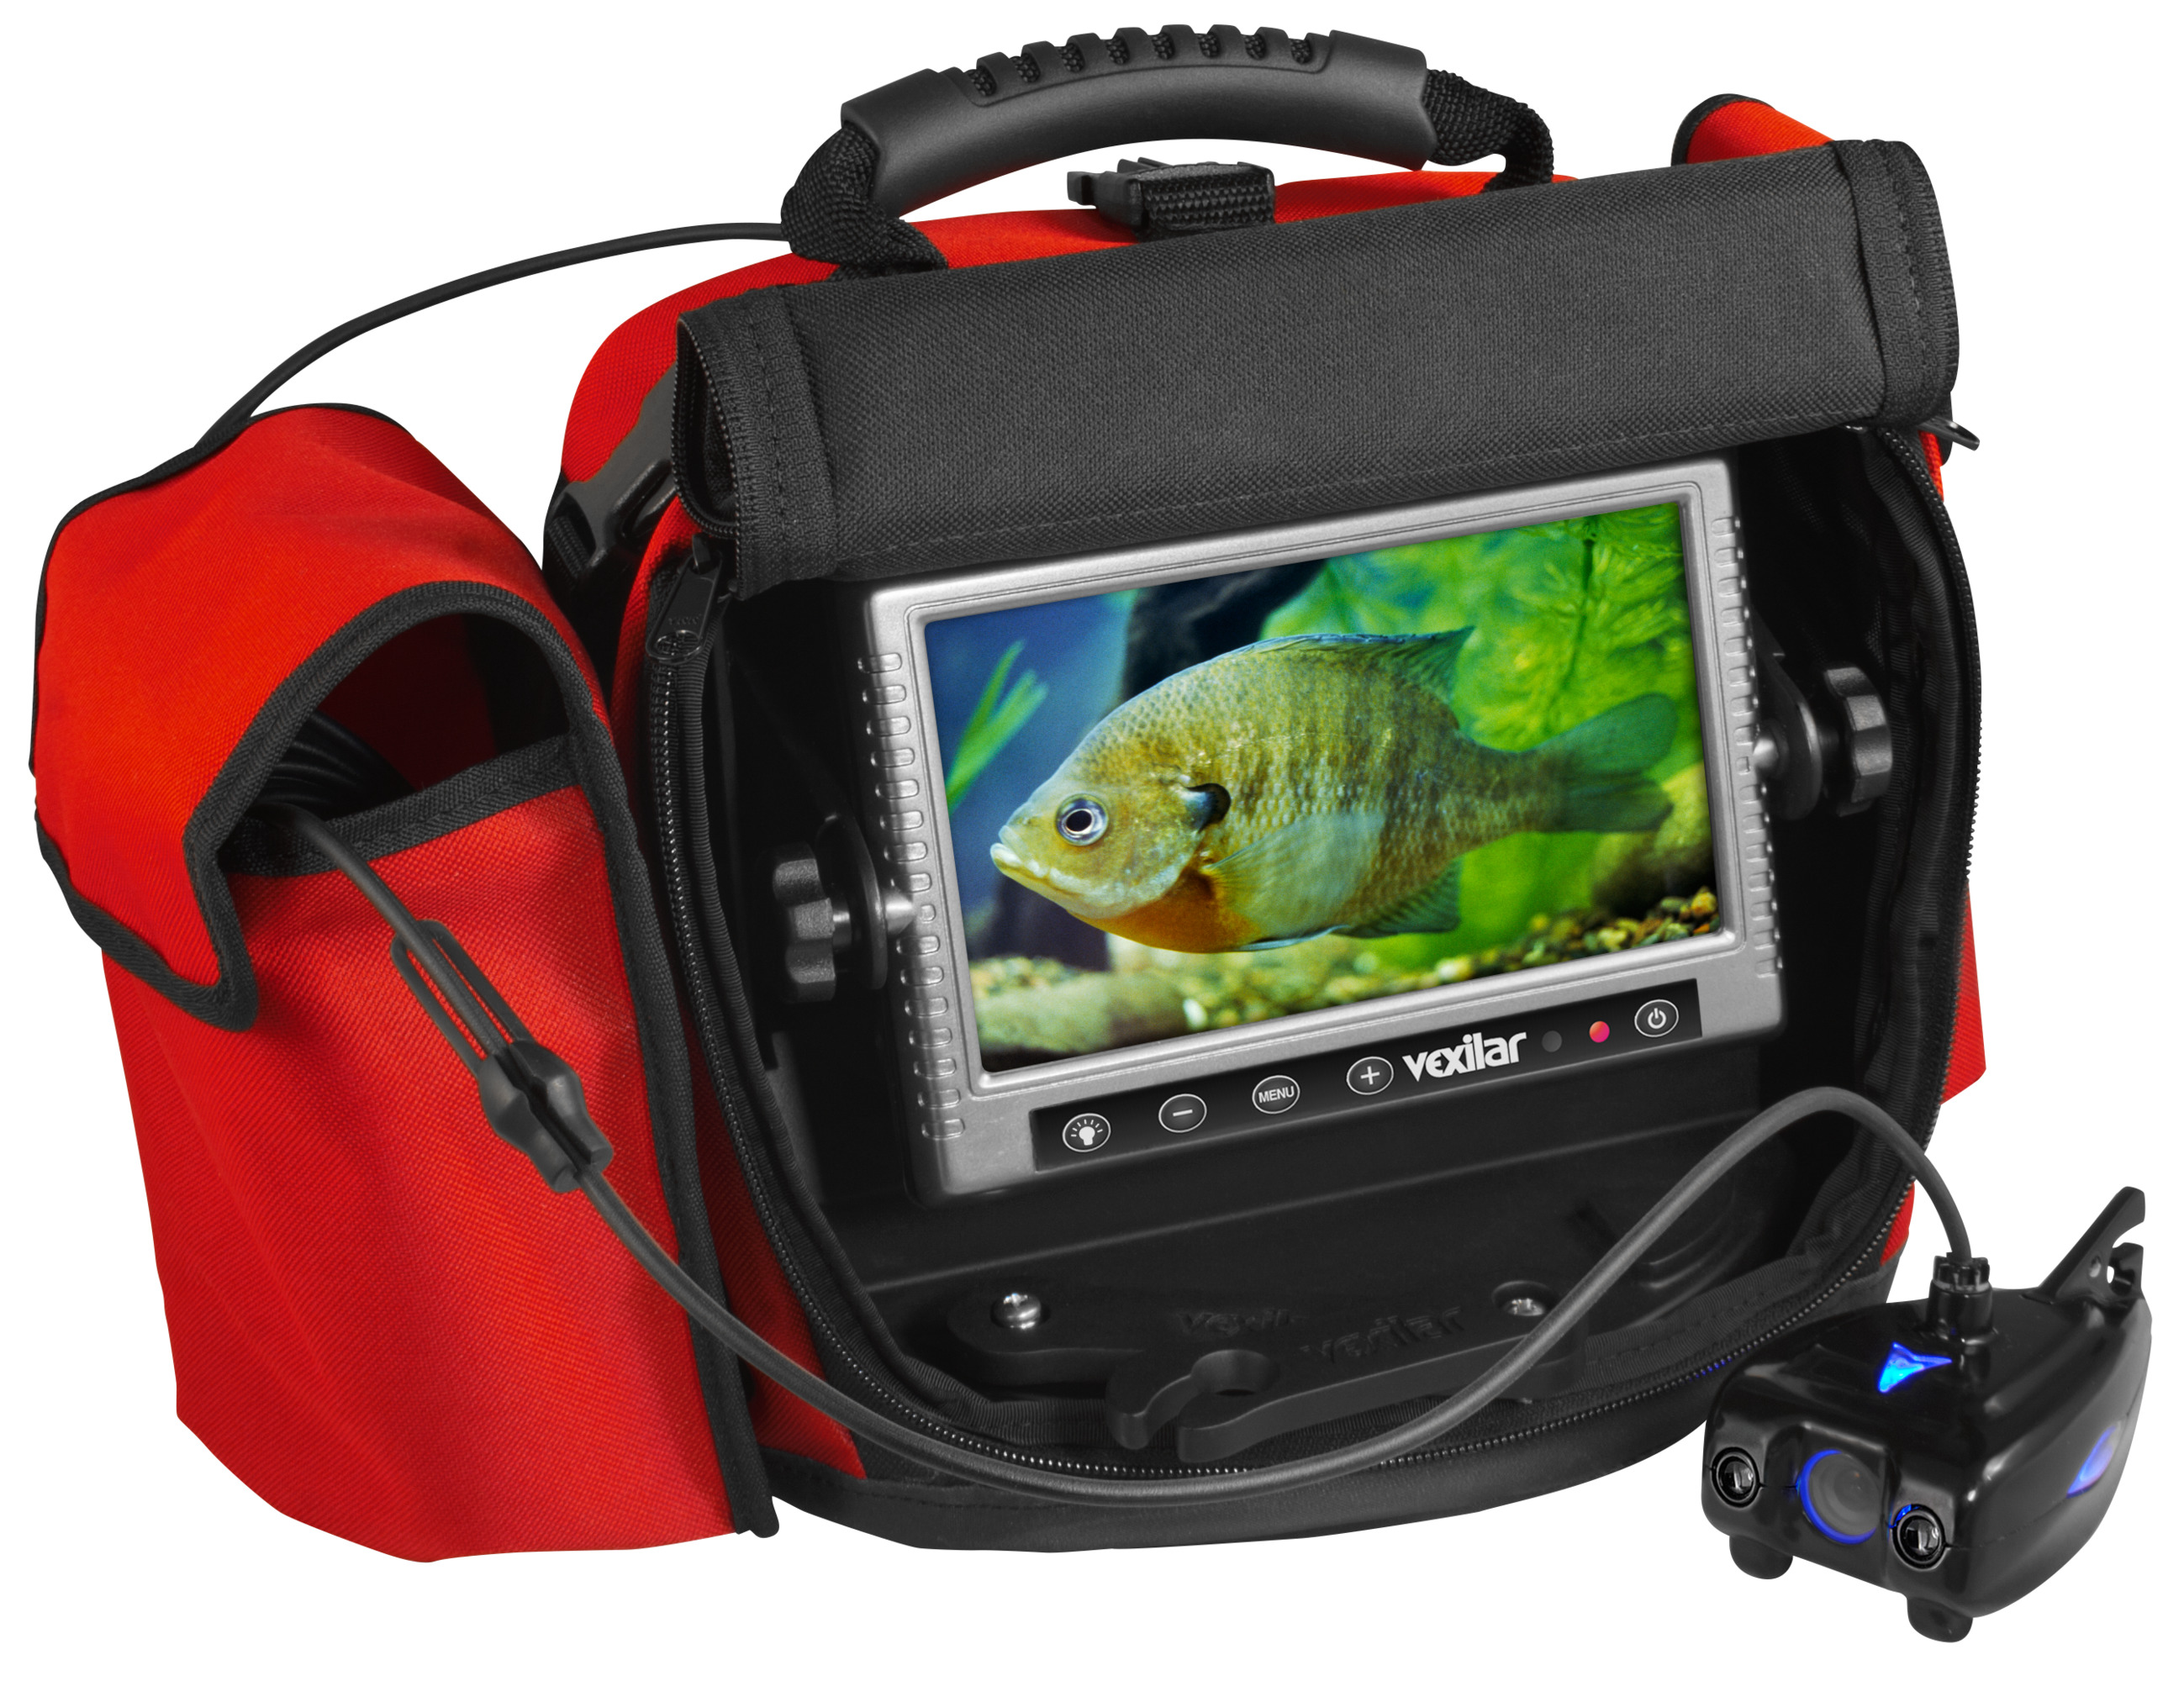 Vexilar FS800IR Fish Scout Color/BW Underwater Camera W/Infrared